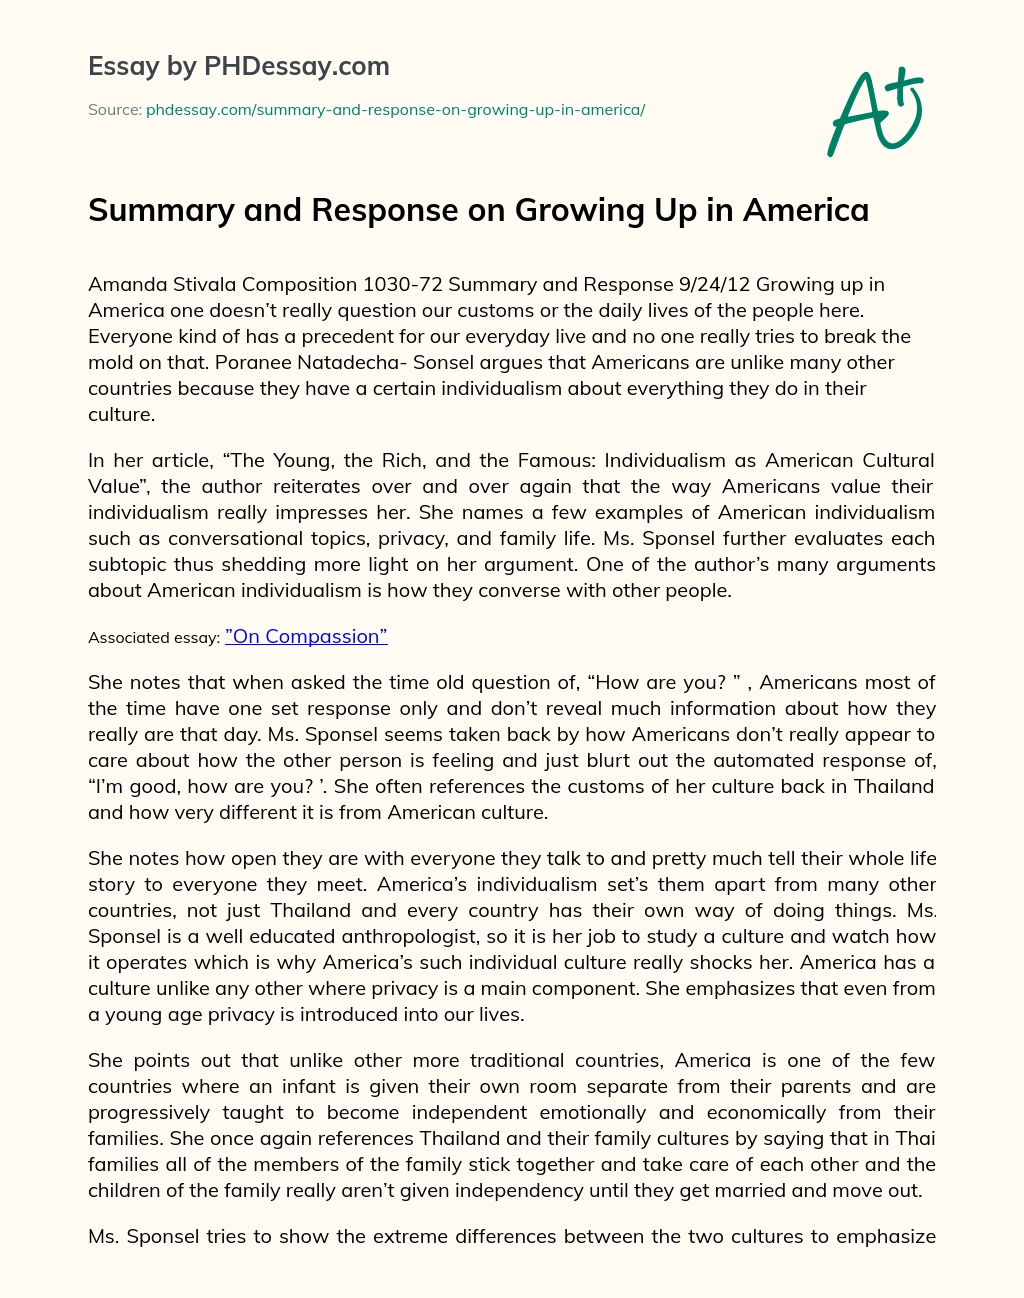 Summary and Response on Growing Up in America essay